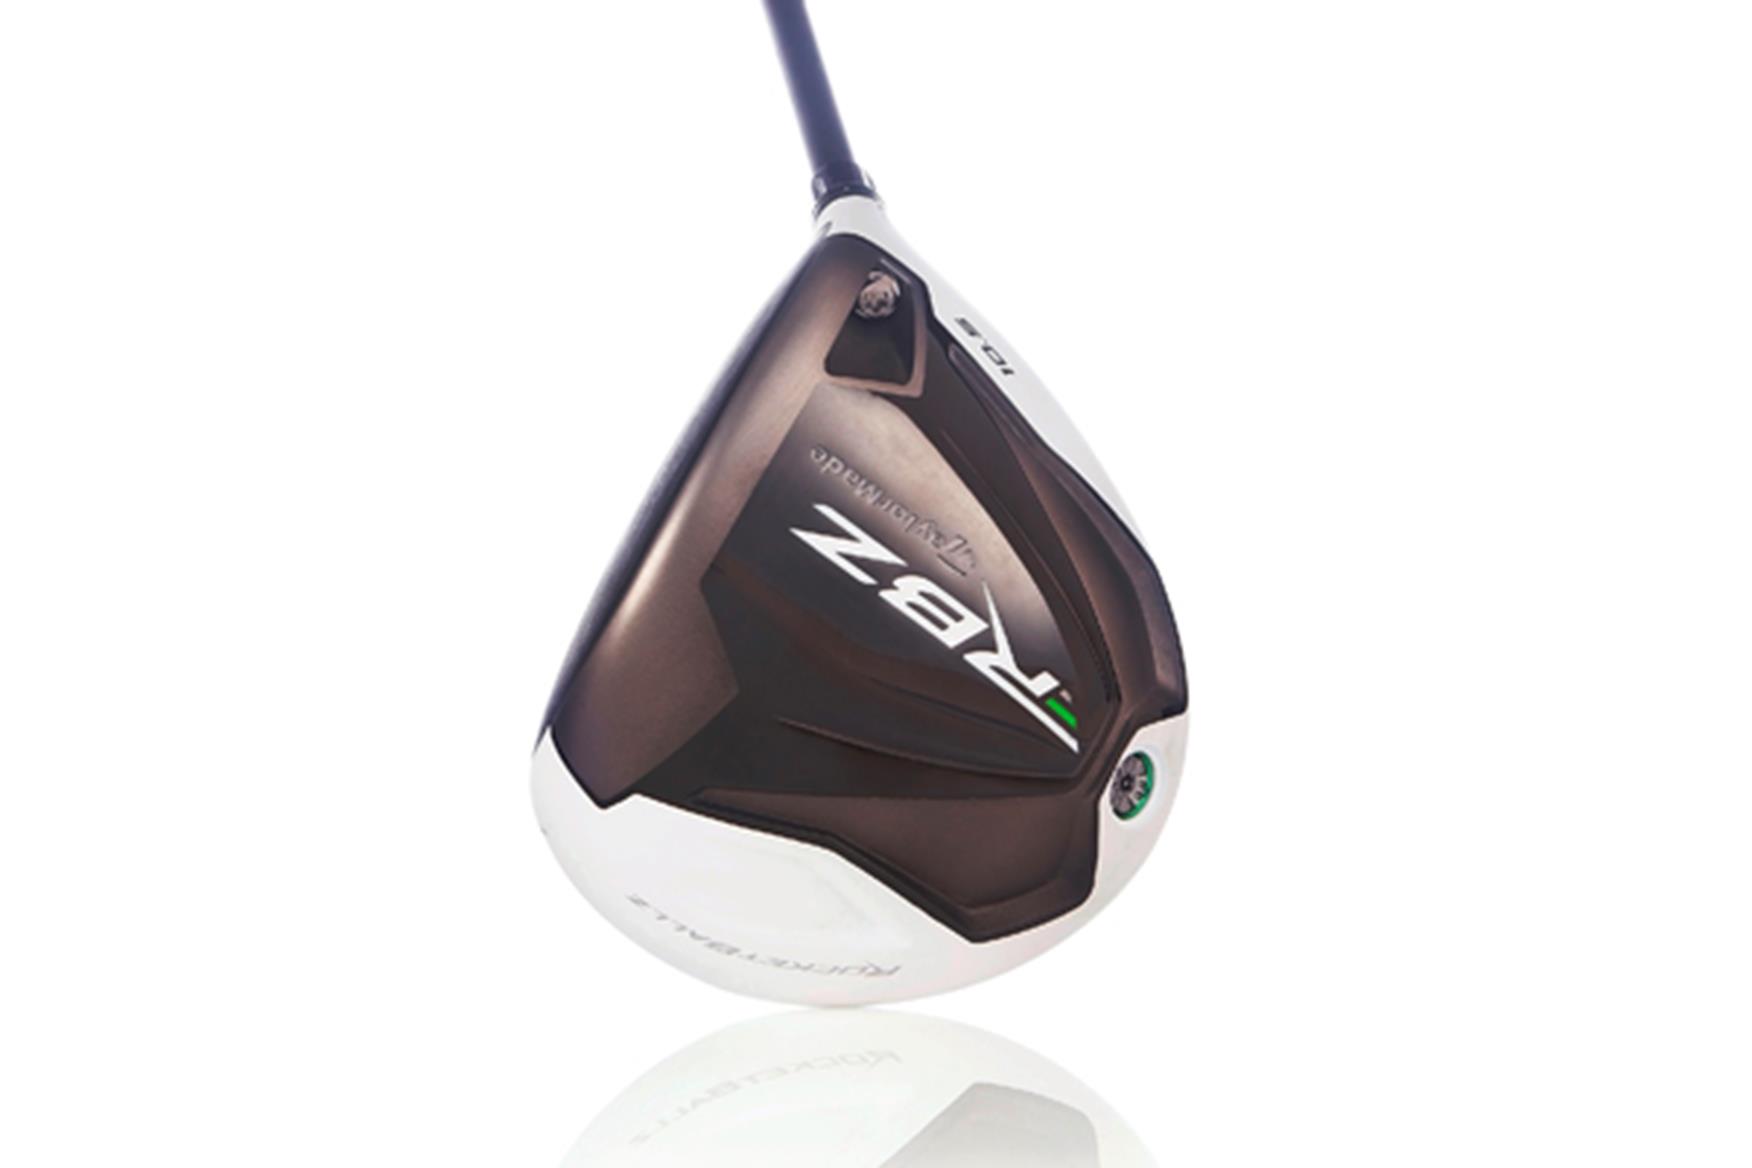 taylormade rocketballz driver stage 1